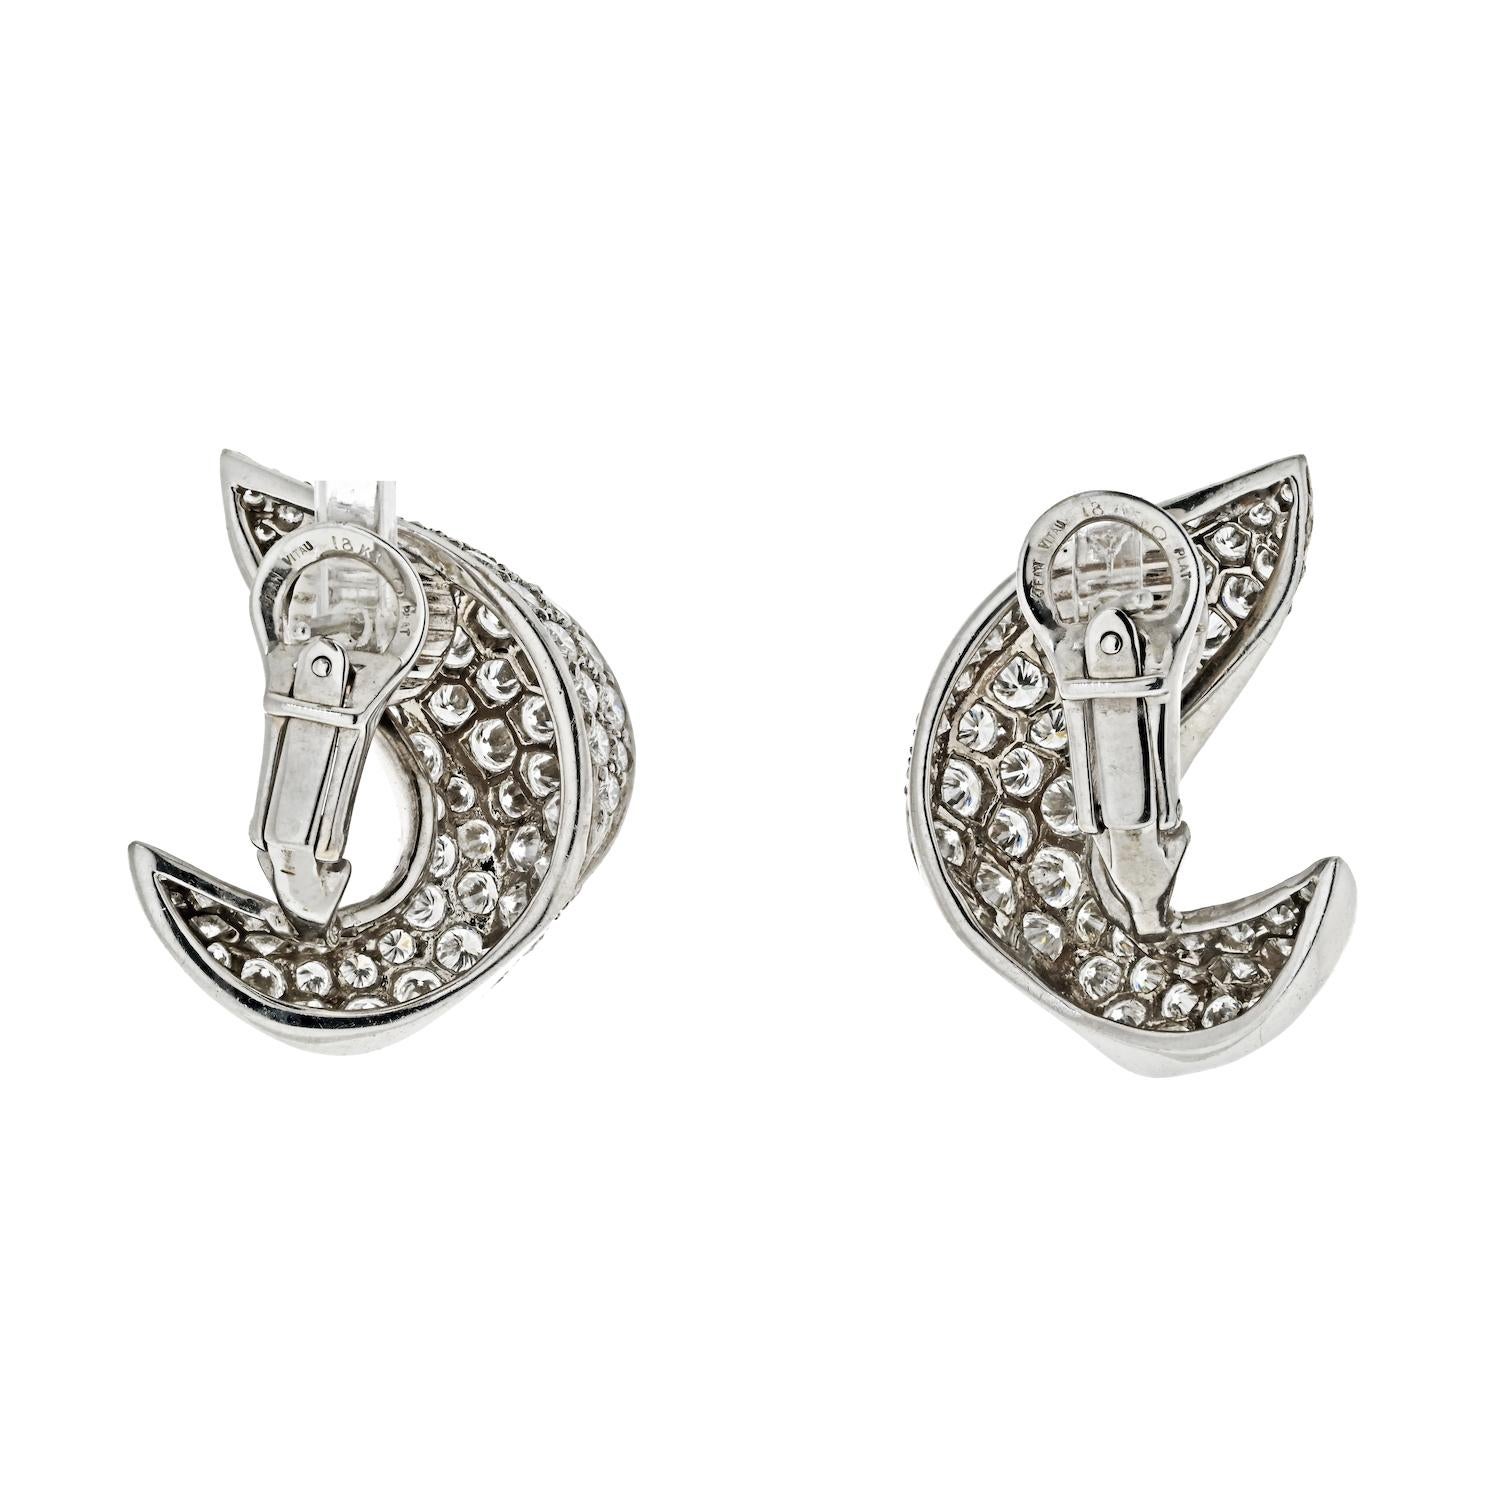 Platinum Jean Vitau 9.50cttw Diamond Clip-On Earrings Circa 1970's In Excellent Condition For Sale In New York, NY